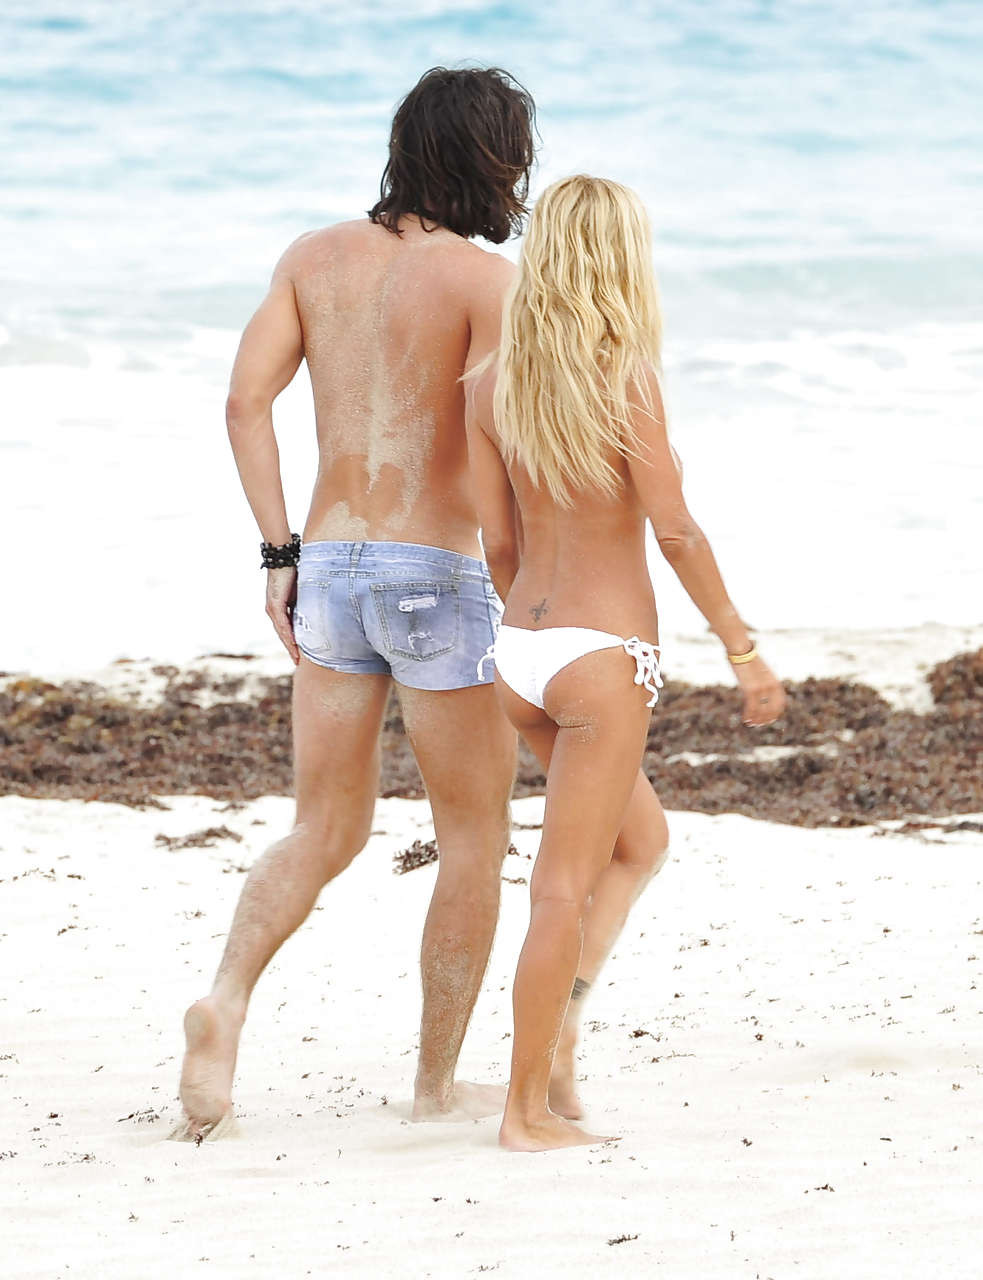 Shauna Sand giving blowjob and fucking on rocks on beach paparazzi pictures #75263421